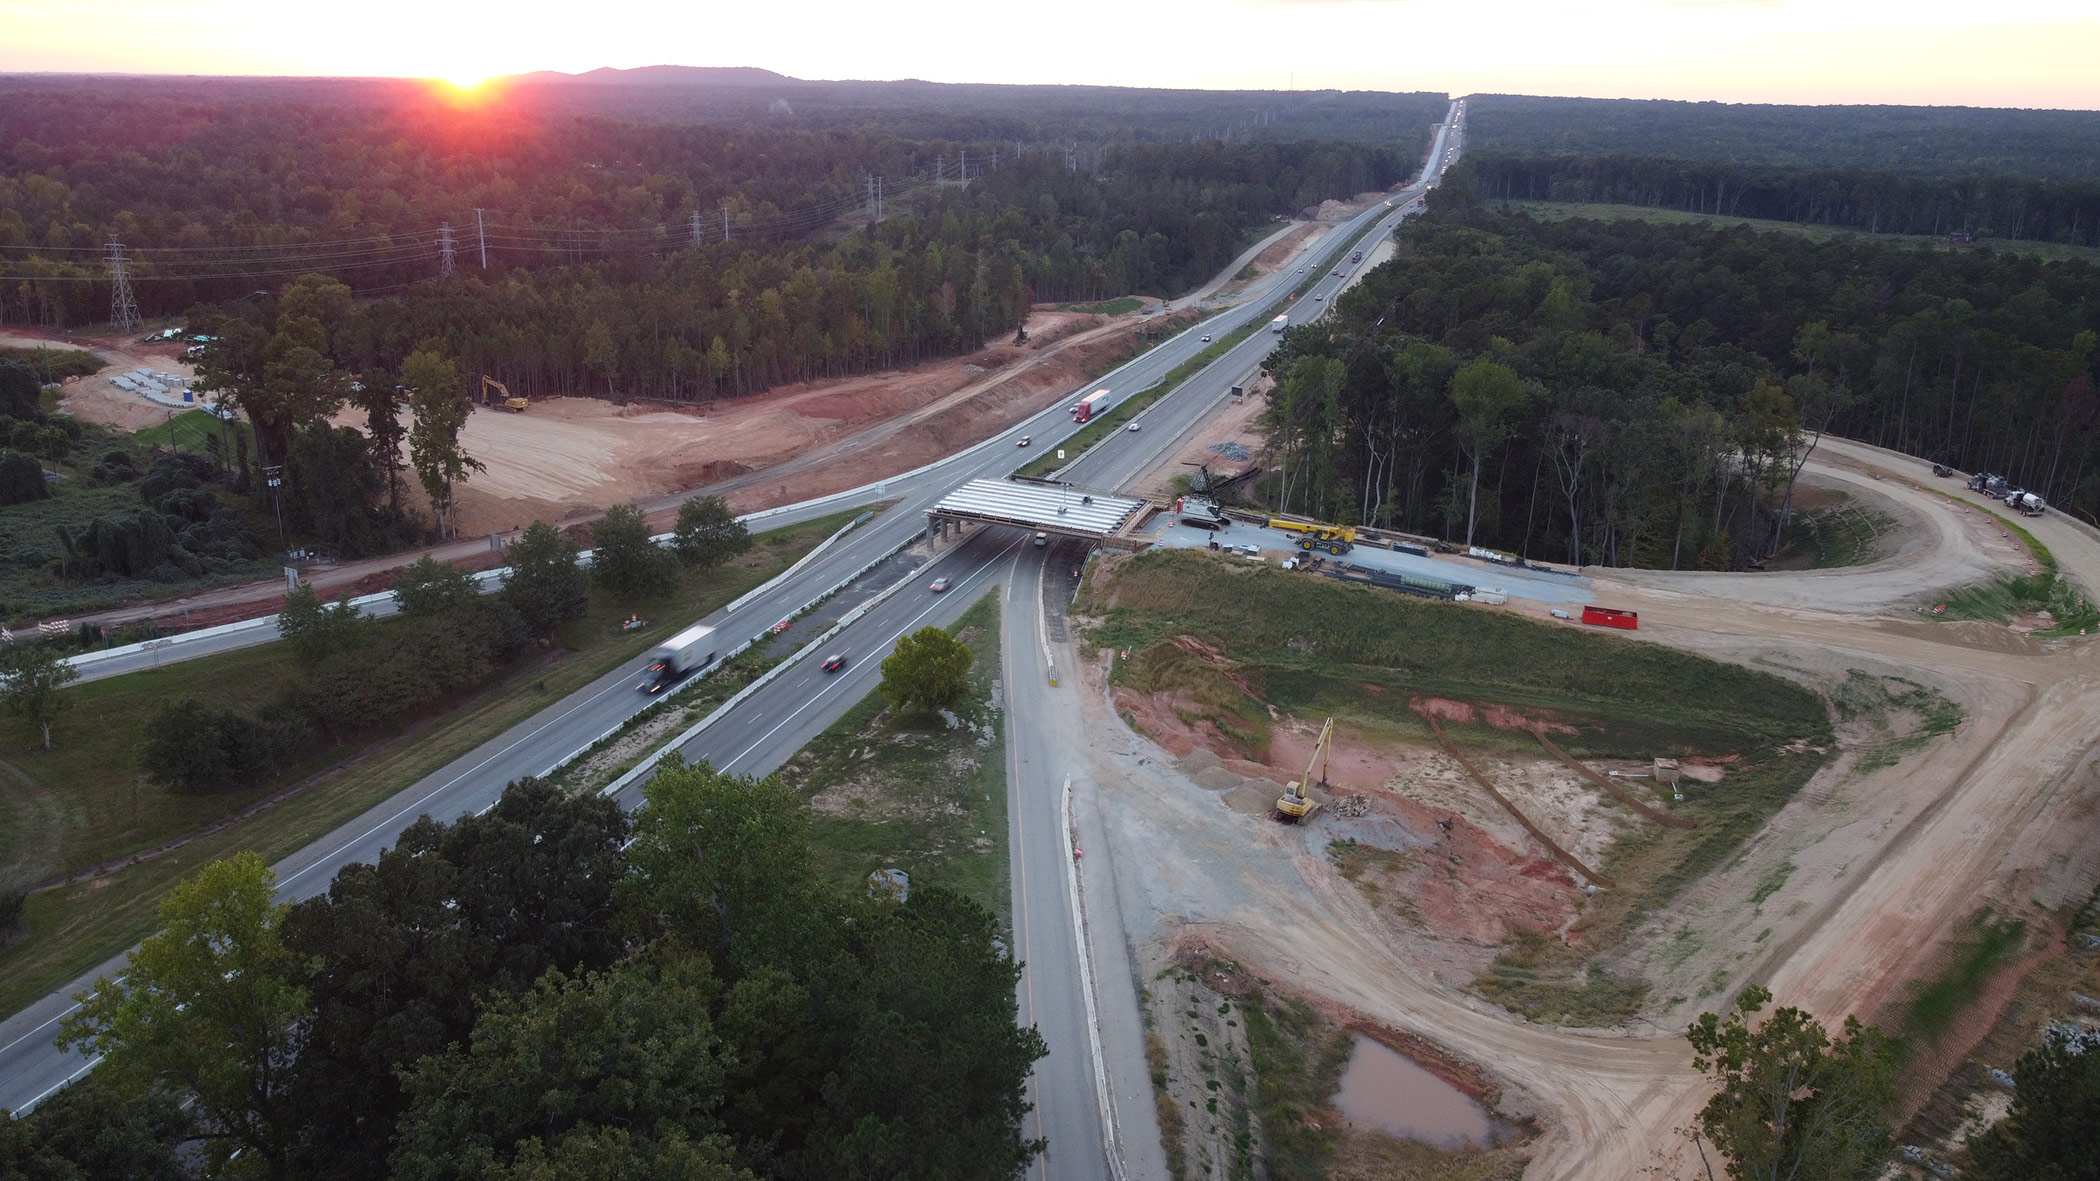 This overhead view of the new interchange at Exit 91 (Columbia Avenue) shows the progress on the new overpass bridge.